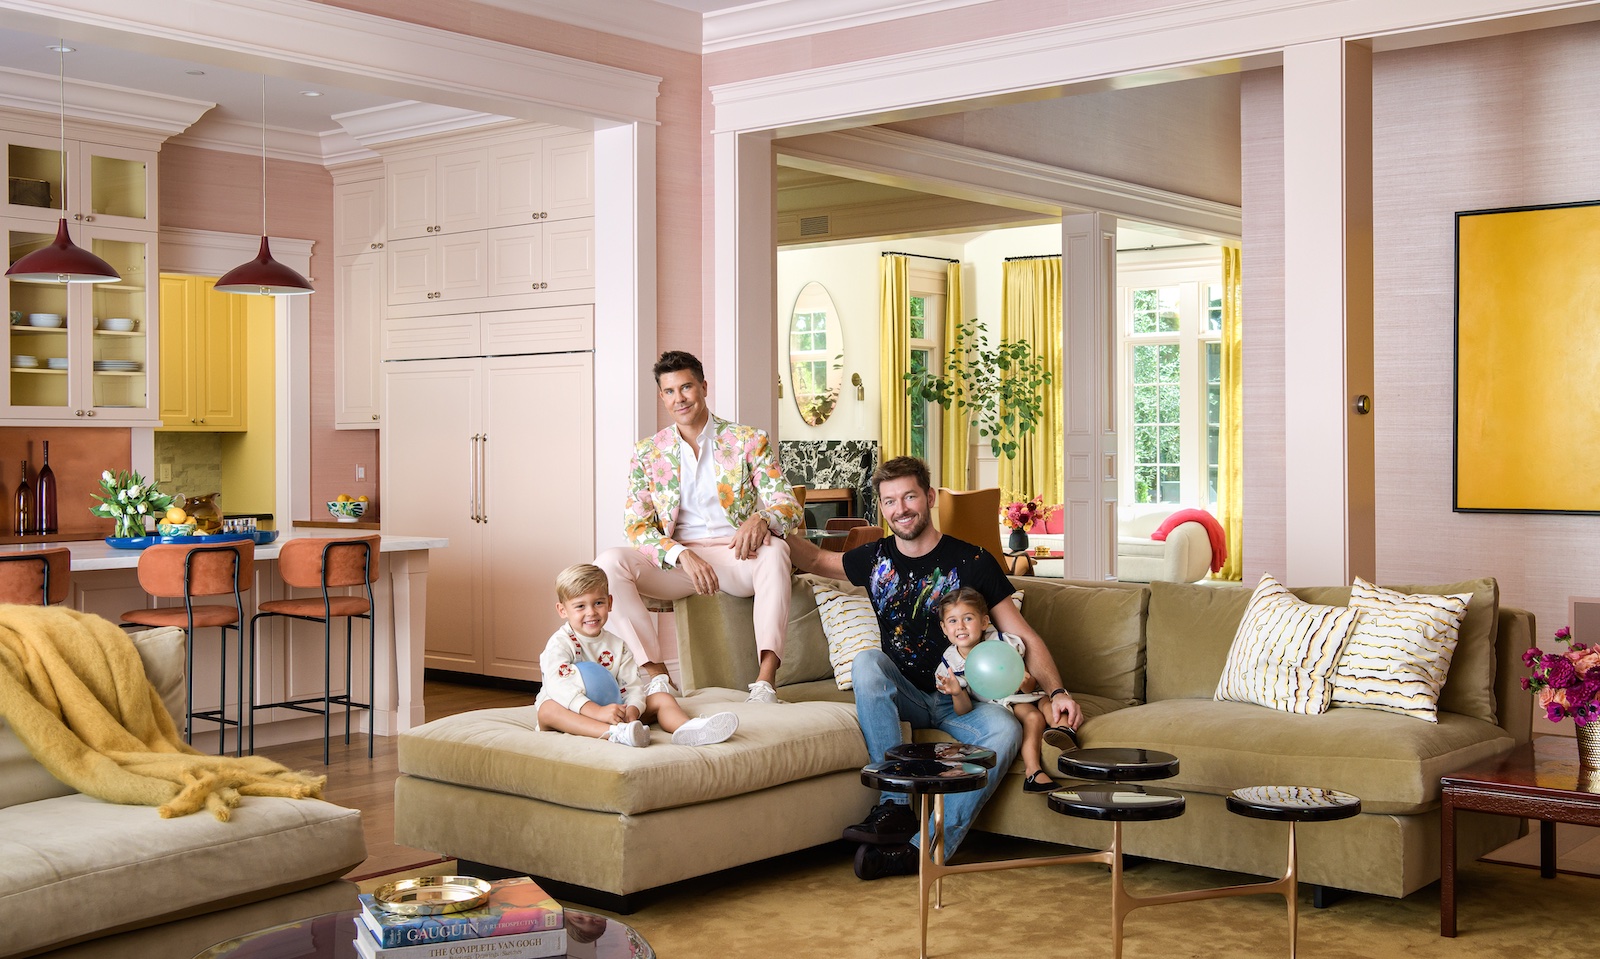 Fredrik Eklund from Million Dollar Listing and family have found their 'forever home'